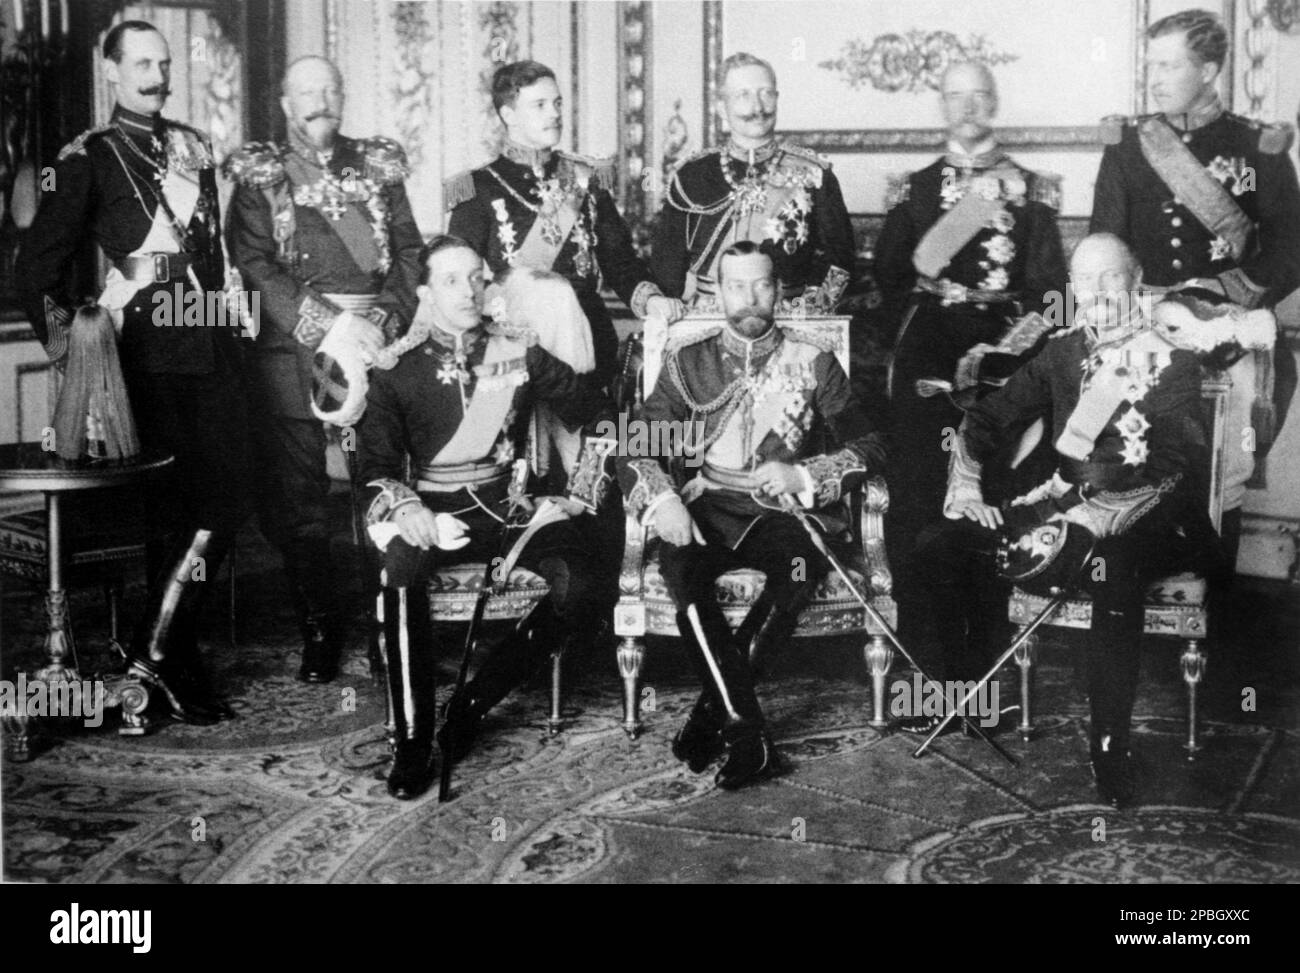 1910 ,  may , London , GREAT BRITAIN : The reunion of european kings relatives of Queen Victoria of England the day of funeral of King of England EDWARD VII .  From left : the King of Norway Haakon VII ( born Prince Carl of Denmark , 1872 - 1957), the King Tsar of Bulgaria Ferdinand I ( 1861-1948) , the King Carol II of Romania (1893 – 1953), the Kaiser WILHELM II ( Guglielmo II ) HOHENZOLLERN , King of Prussen, Emperor of Germany ( 1859 - 1941 ) , The King of (?) , The King of Belgium ALBERT I ( 1875 - 1934 ) of  Brabant , (and seated :) the King of Spain Alfonso XIII ( 1886-1941), the future Stock Photo